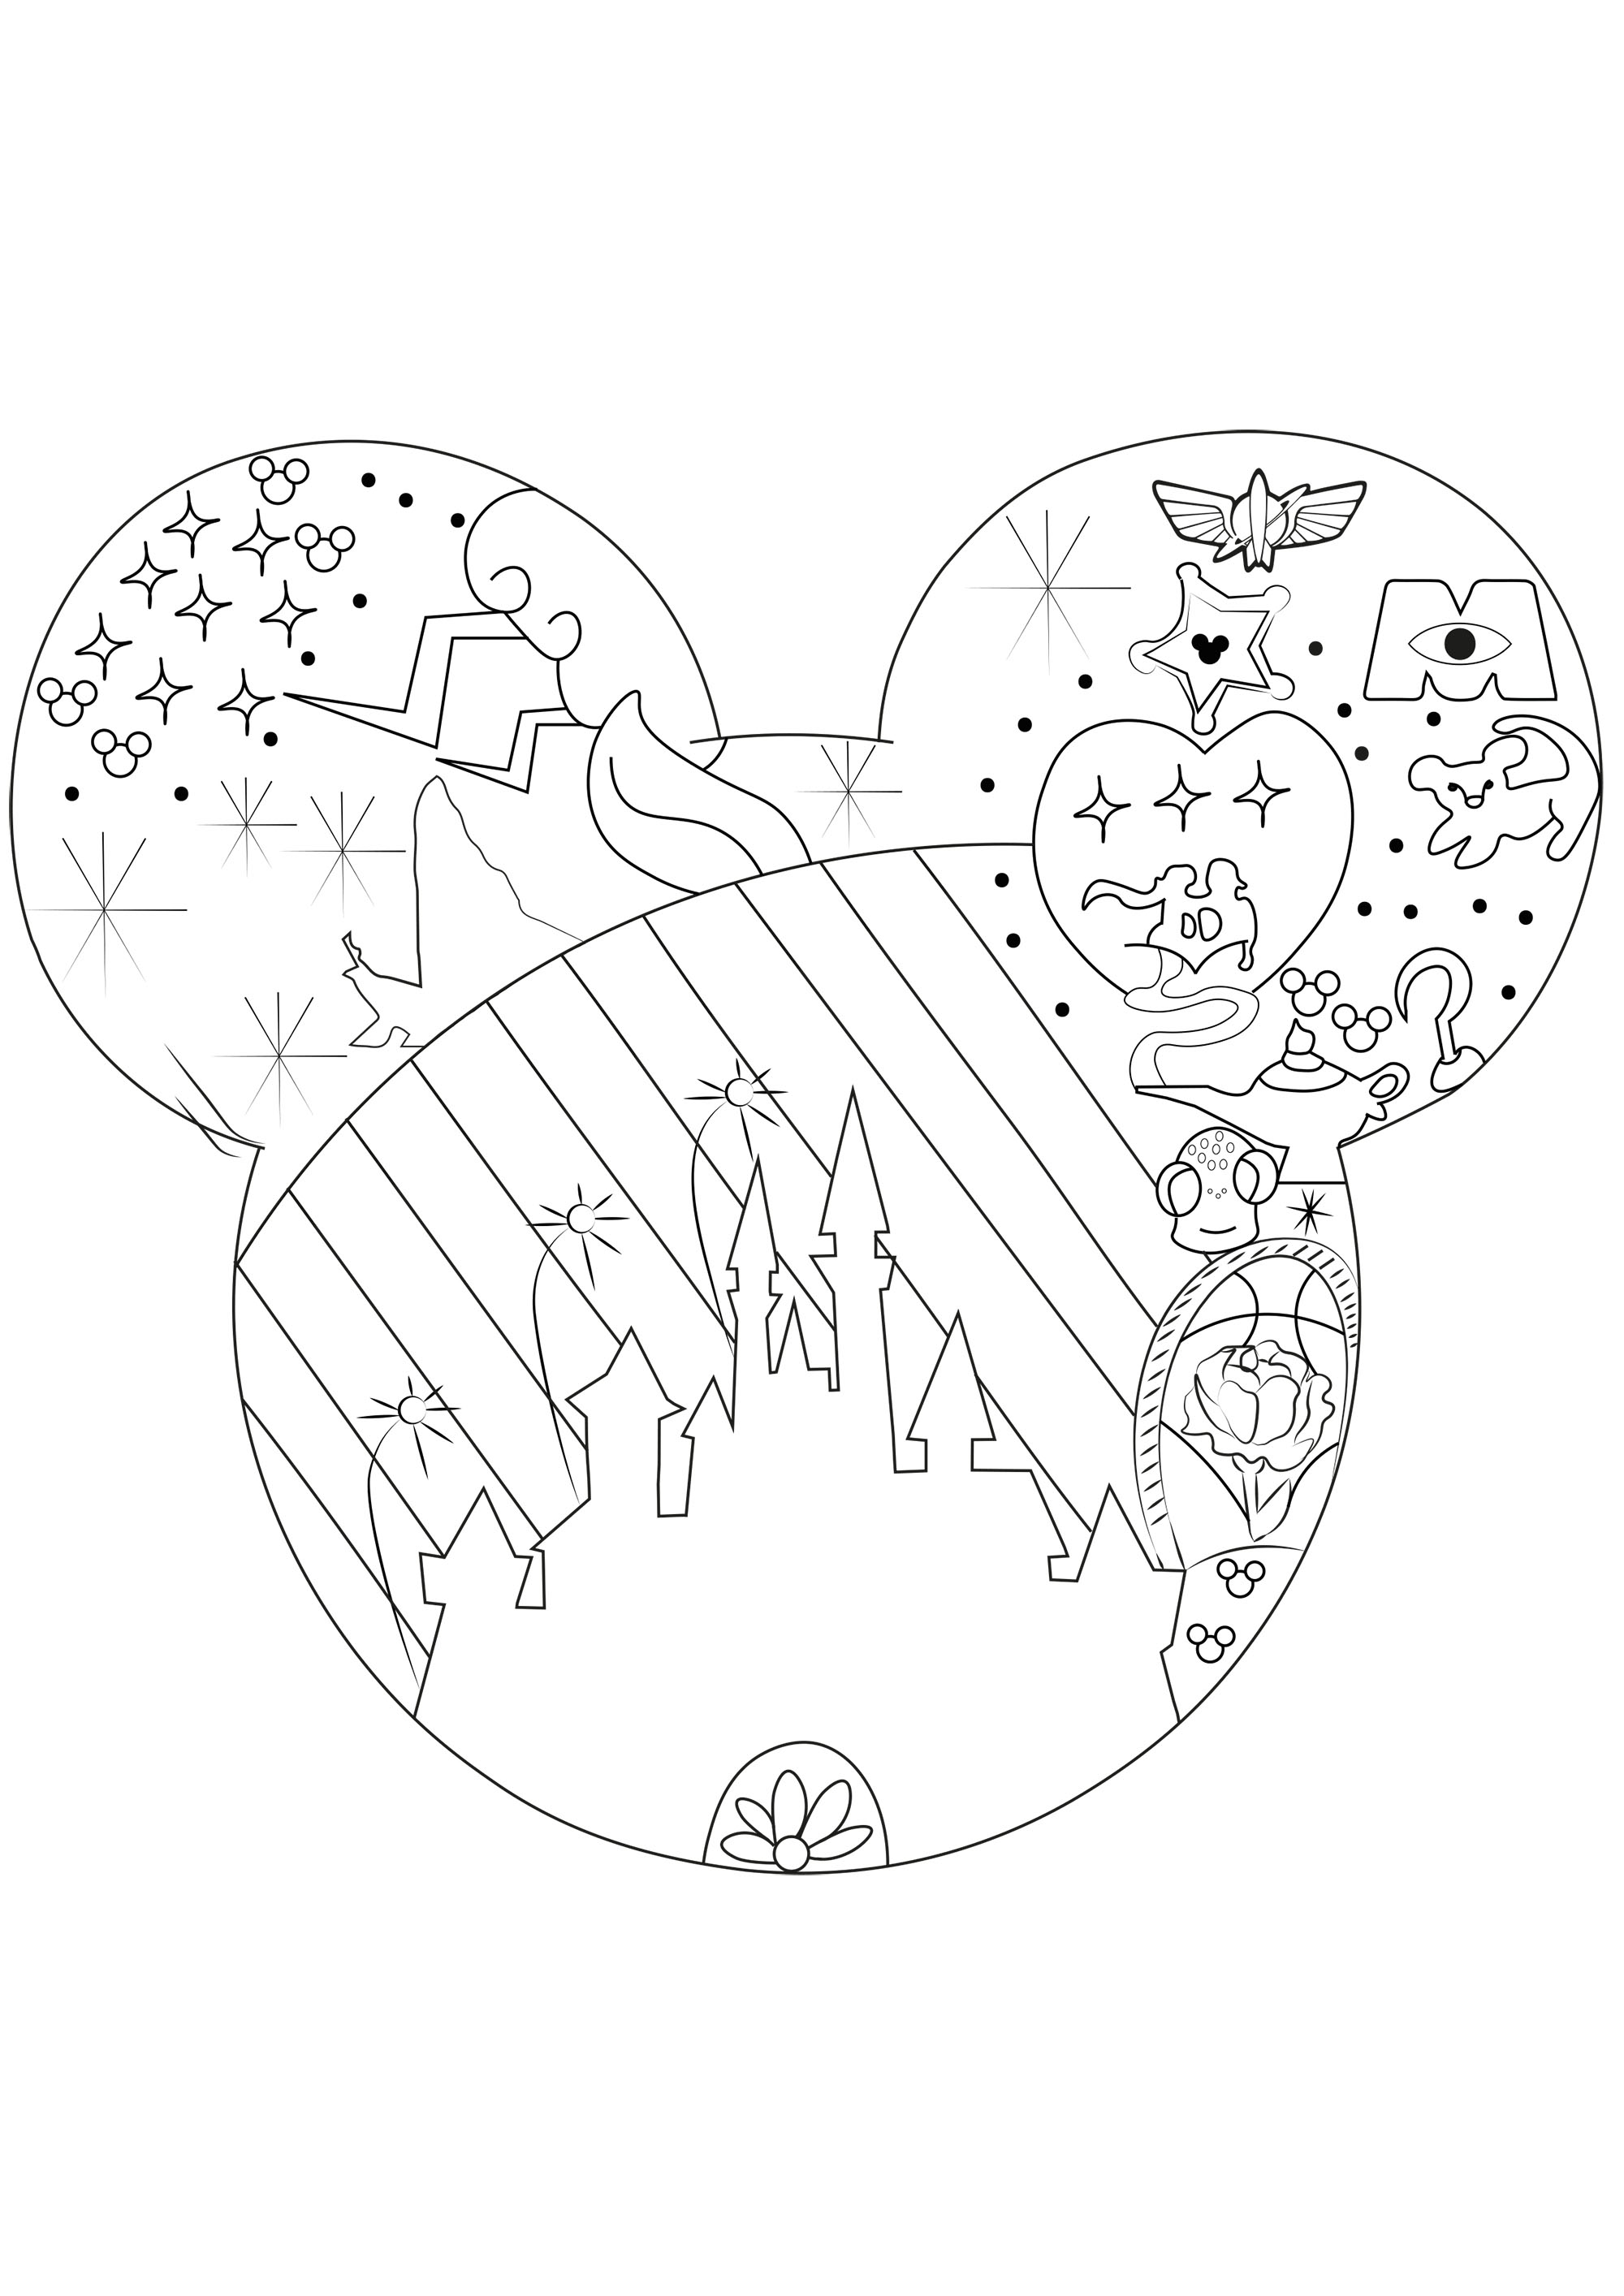 Disney Universe Return To Childhood Adult Coloring Pages